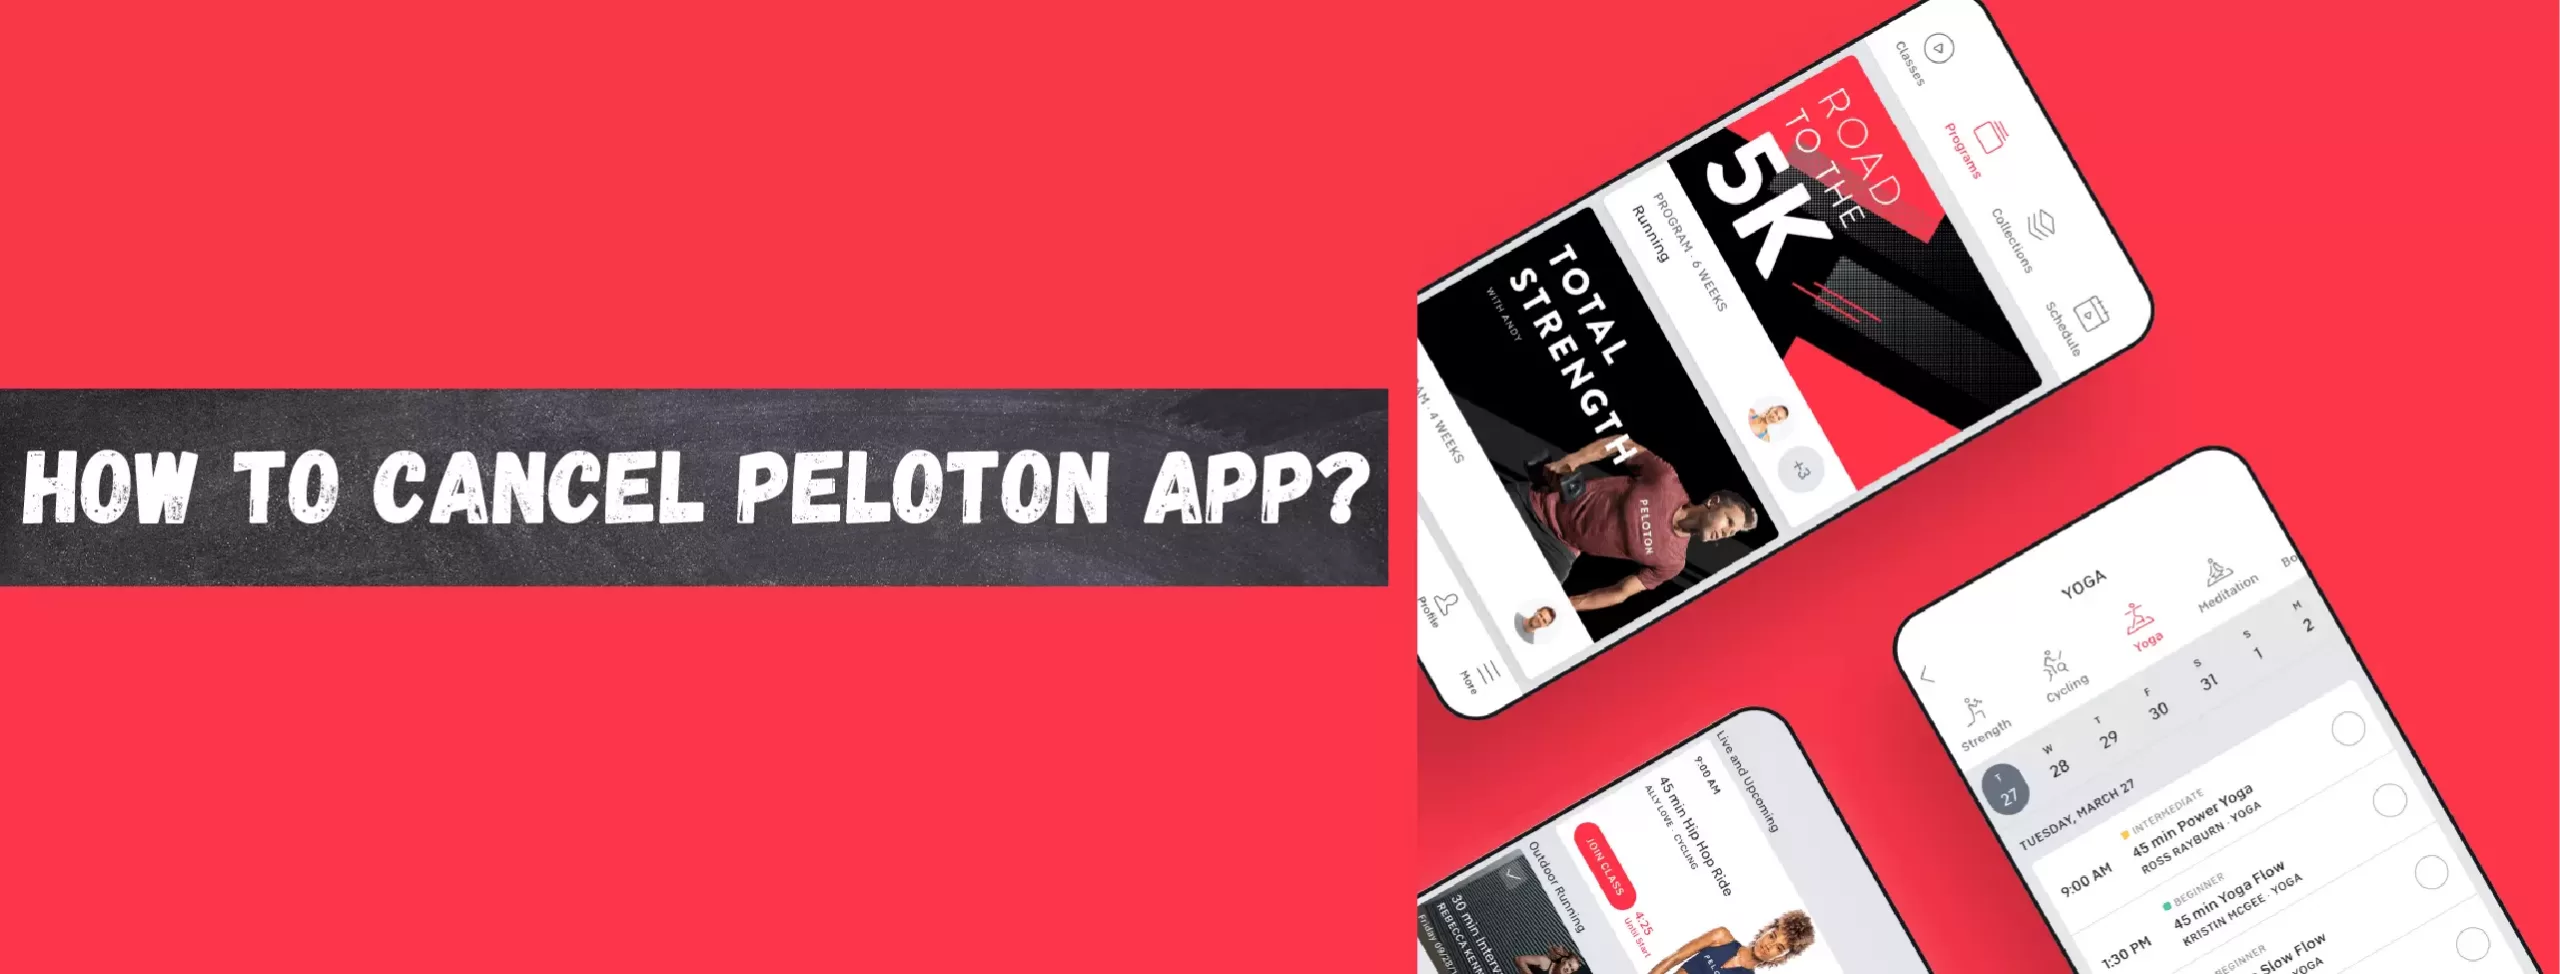 How To Cancel Peloton App scaled